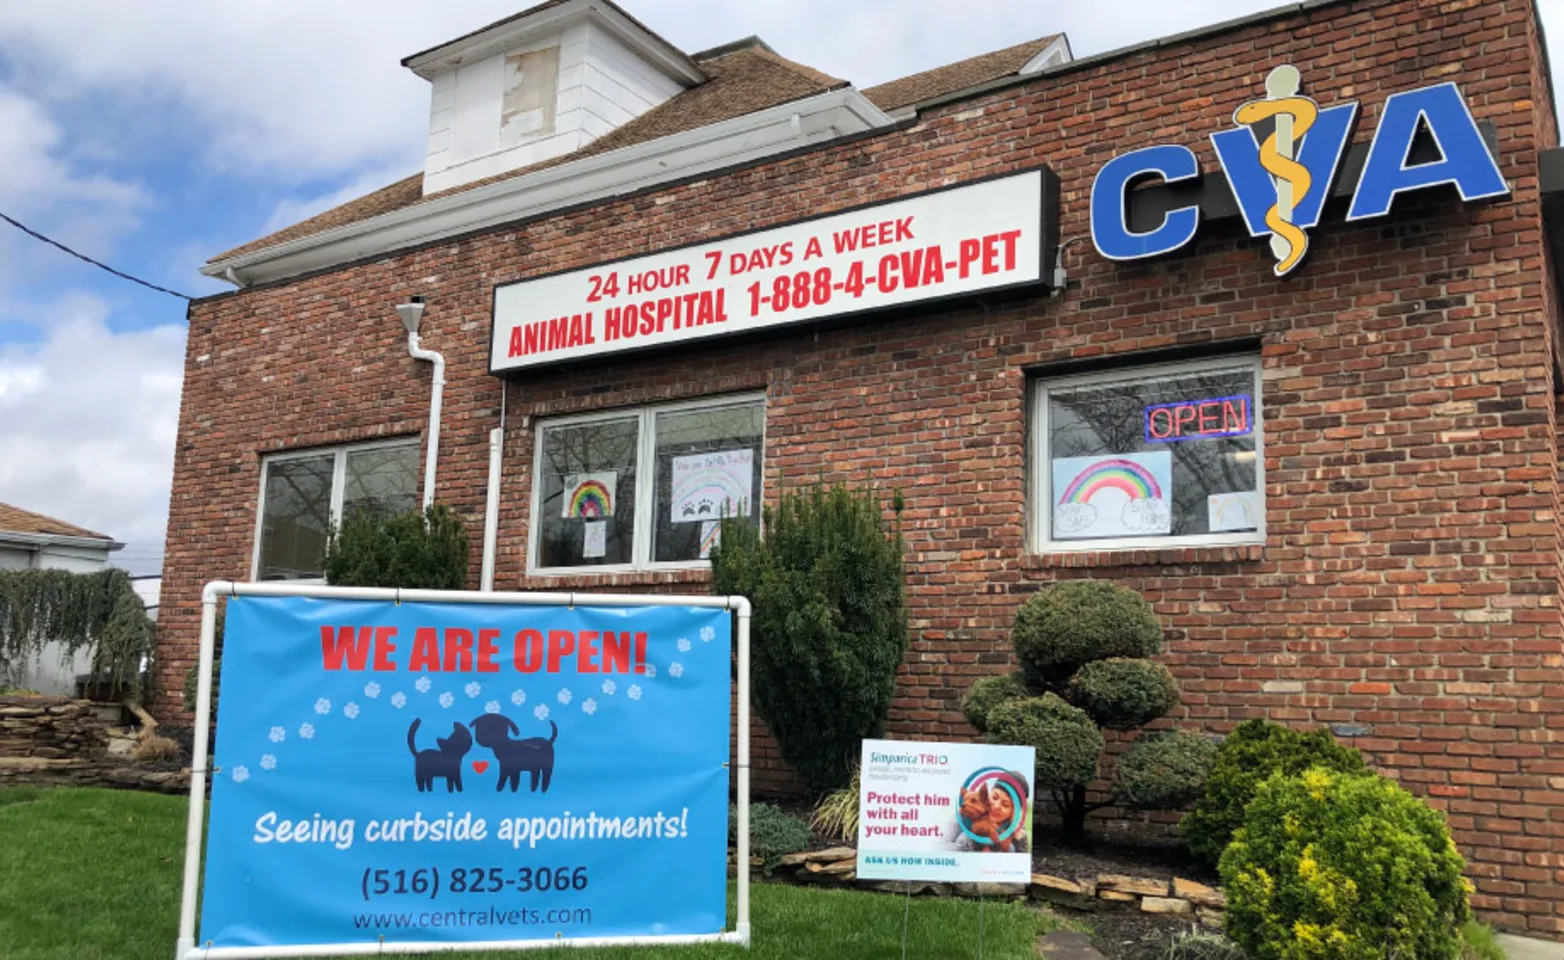 Central Veterinary Associates one location with logo in top right corner